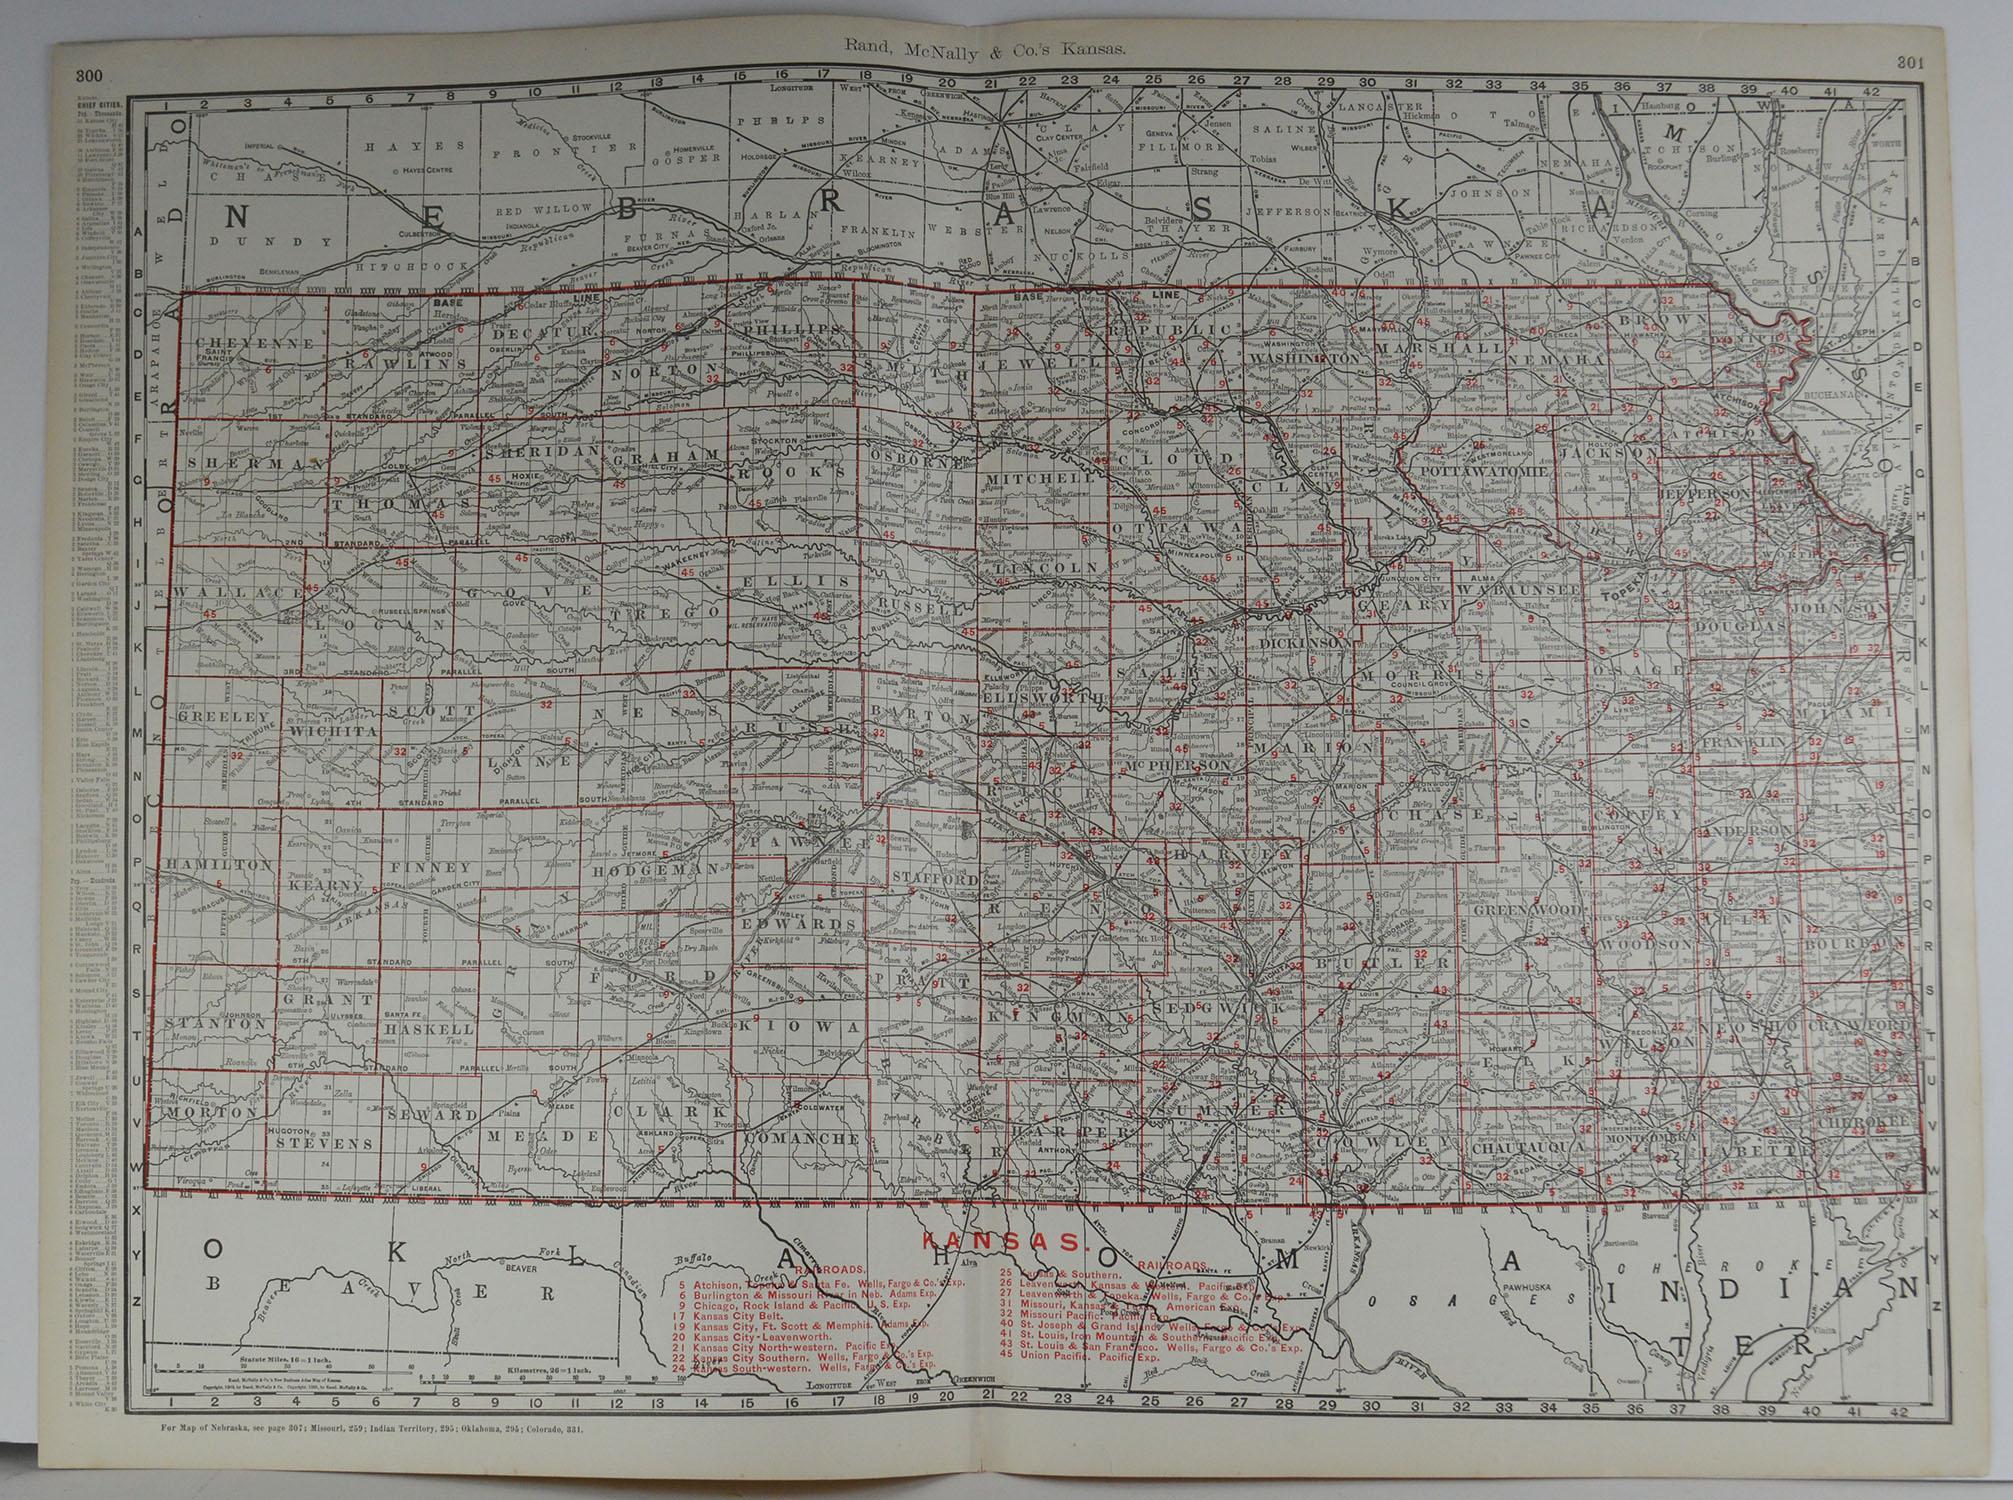 Fabulous monochrome map with red outline color 

Original color

By Rand, McNally & Co.

Published circa 1900

Unframed

minor edge tears.